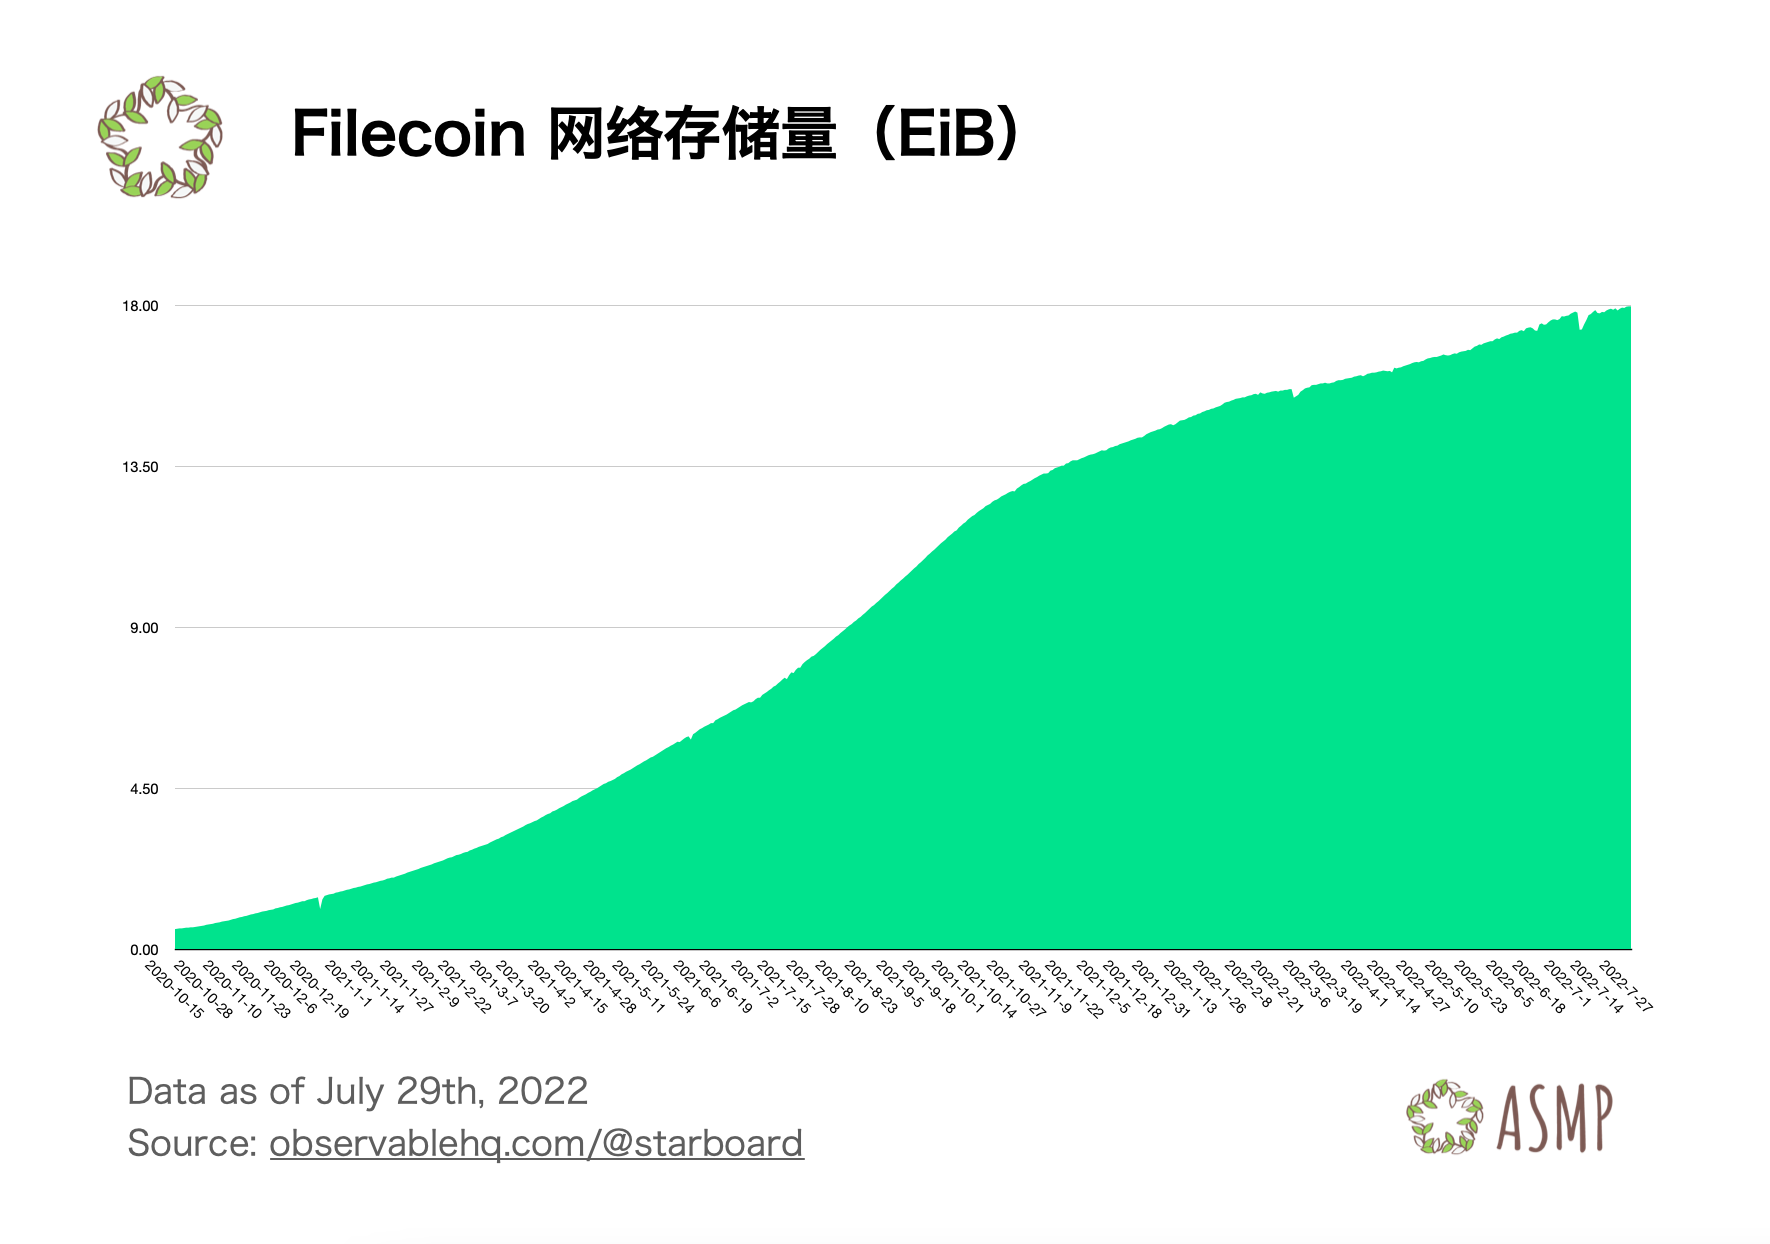 Filecoin network storage capacity exceeds 16 exabytes by Q2 2022